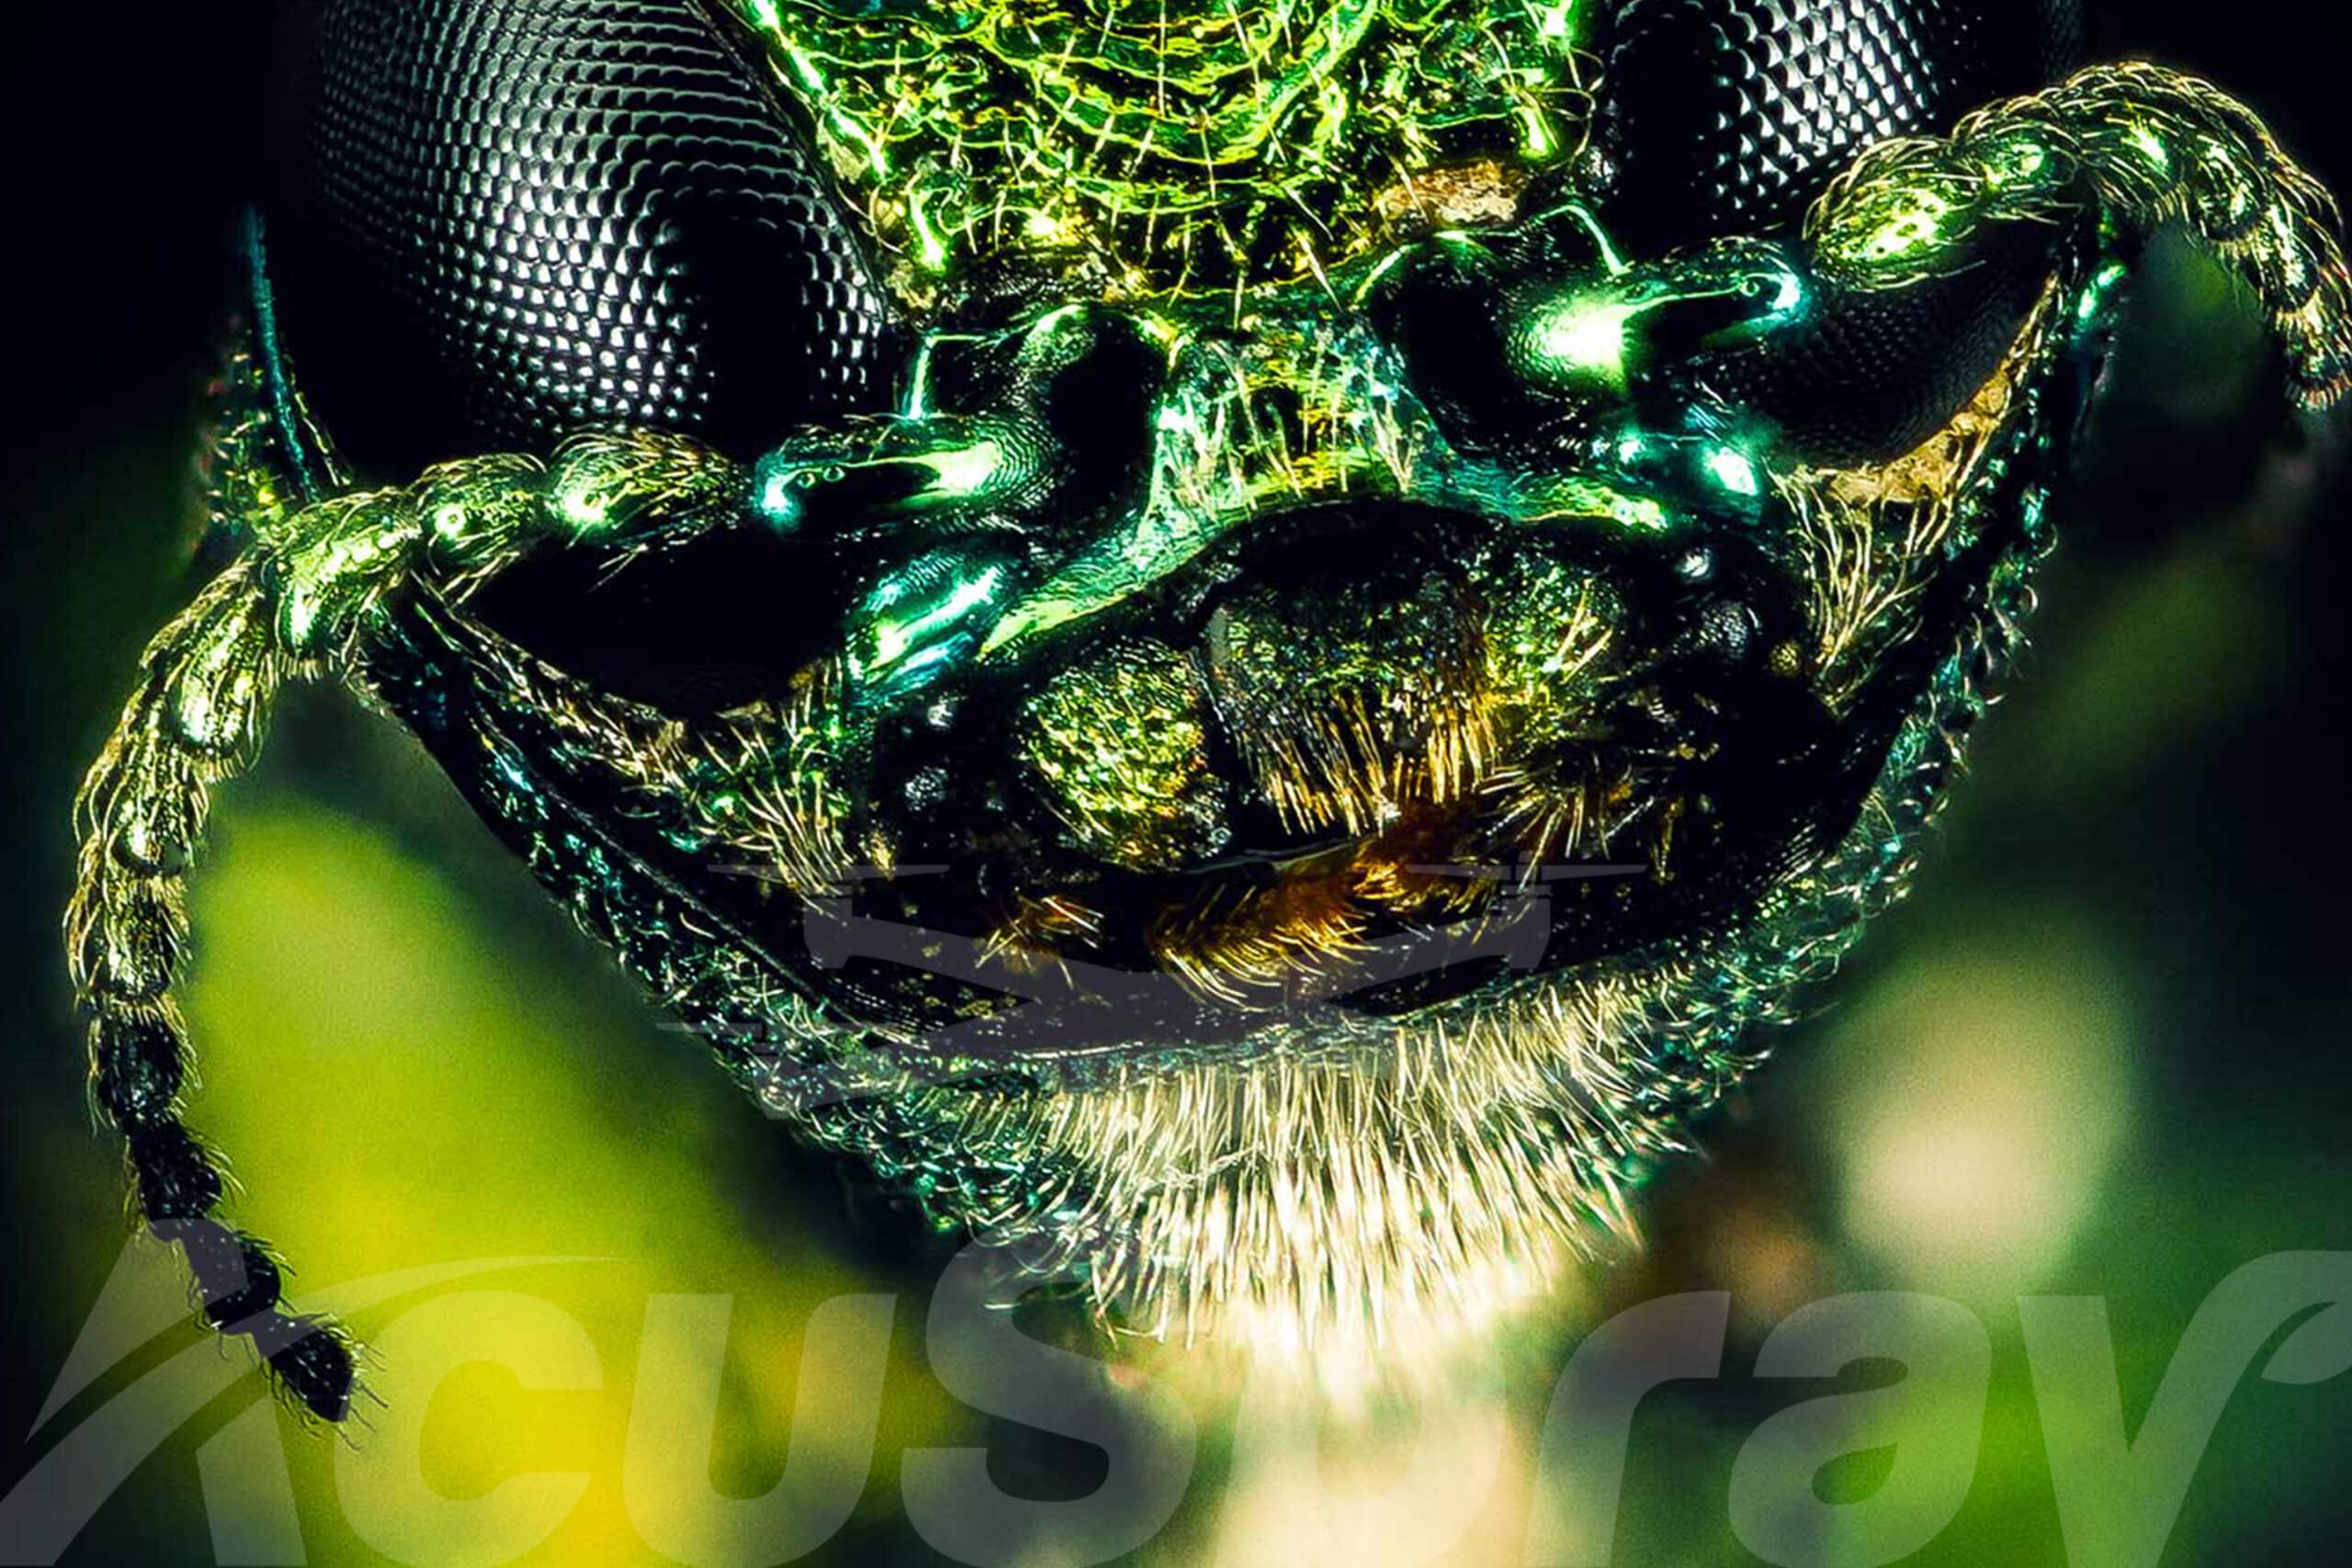 Close-up image of an Emerald Ash Borer, showcasing its metallic green color and intricate textures.